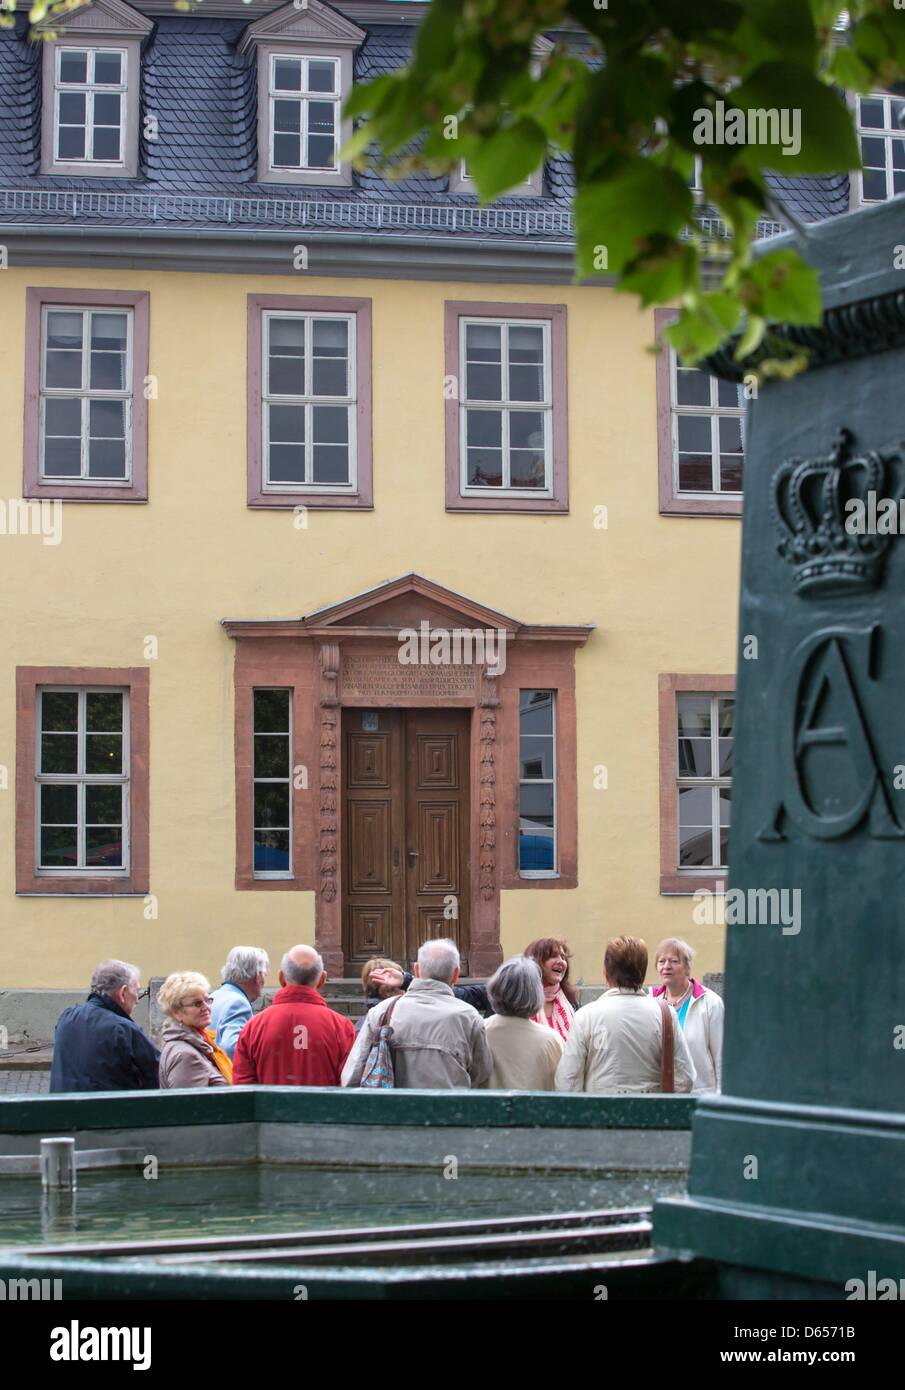 After a suspicious can with white powder was found the previous day the Goethe House in Weimar is open for visitors again today in Weimar, Germany, 13 June 2012. The white powder is currently being analysed by the state criminal police. Results are expected in a few days. The world famous former residence of poet Johann Wolfgang von Goethe (1749-1832) had to be closed to visitors f Stock Photo